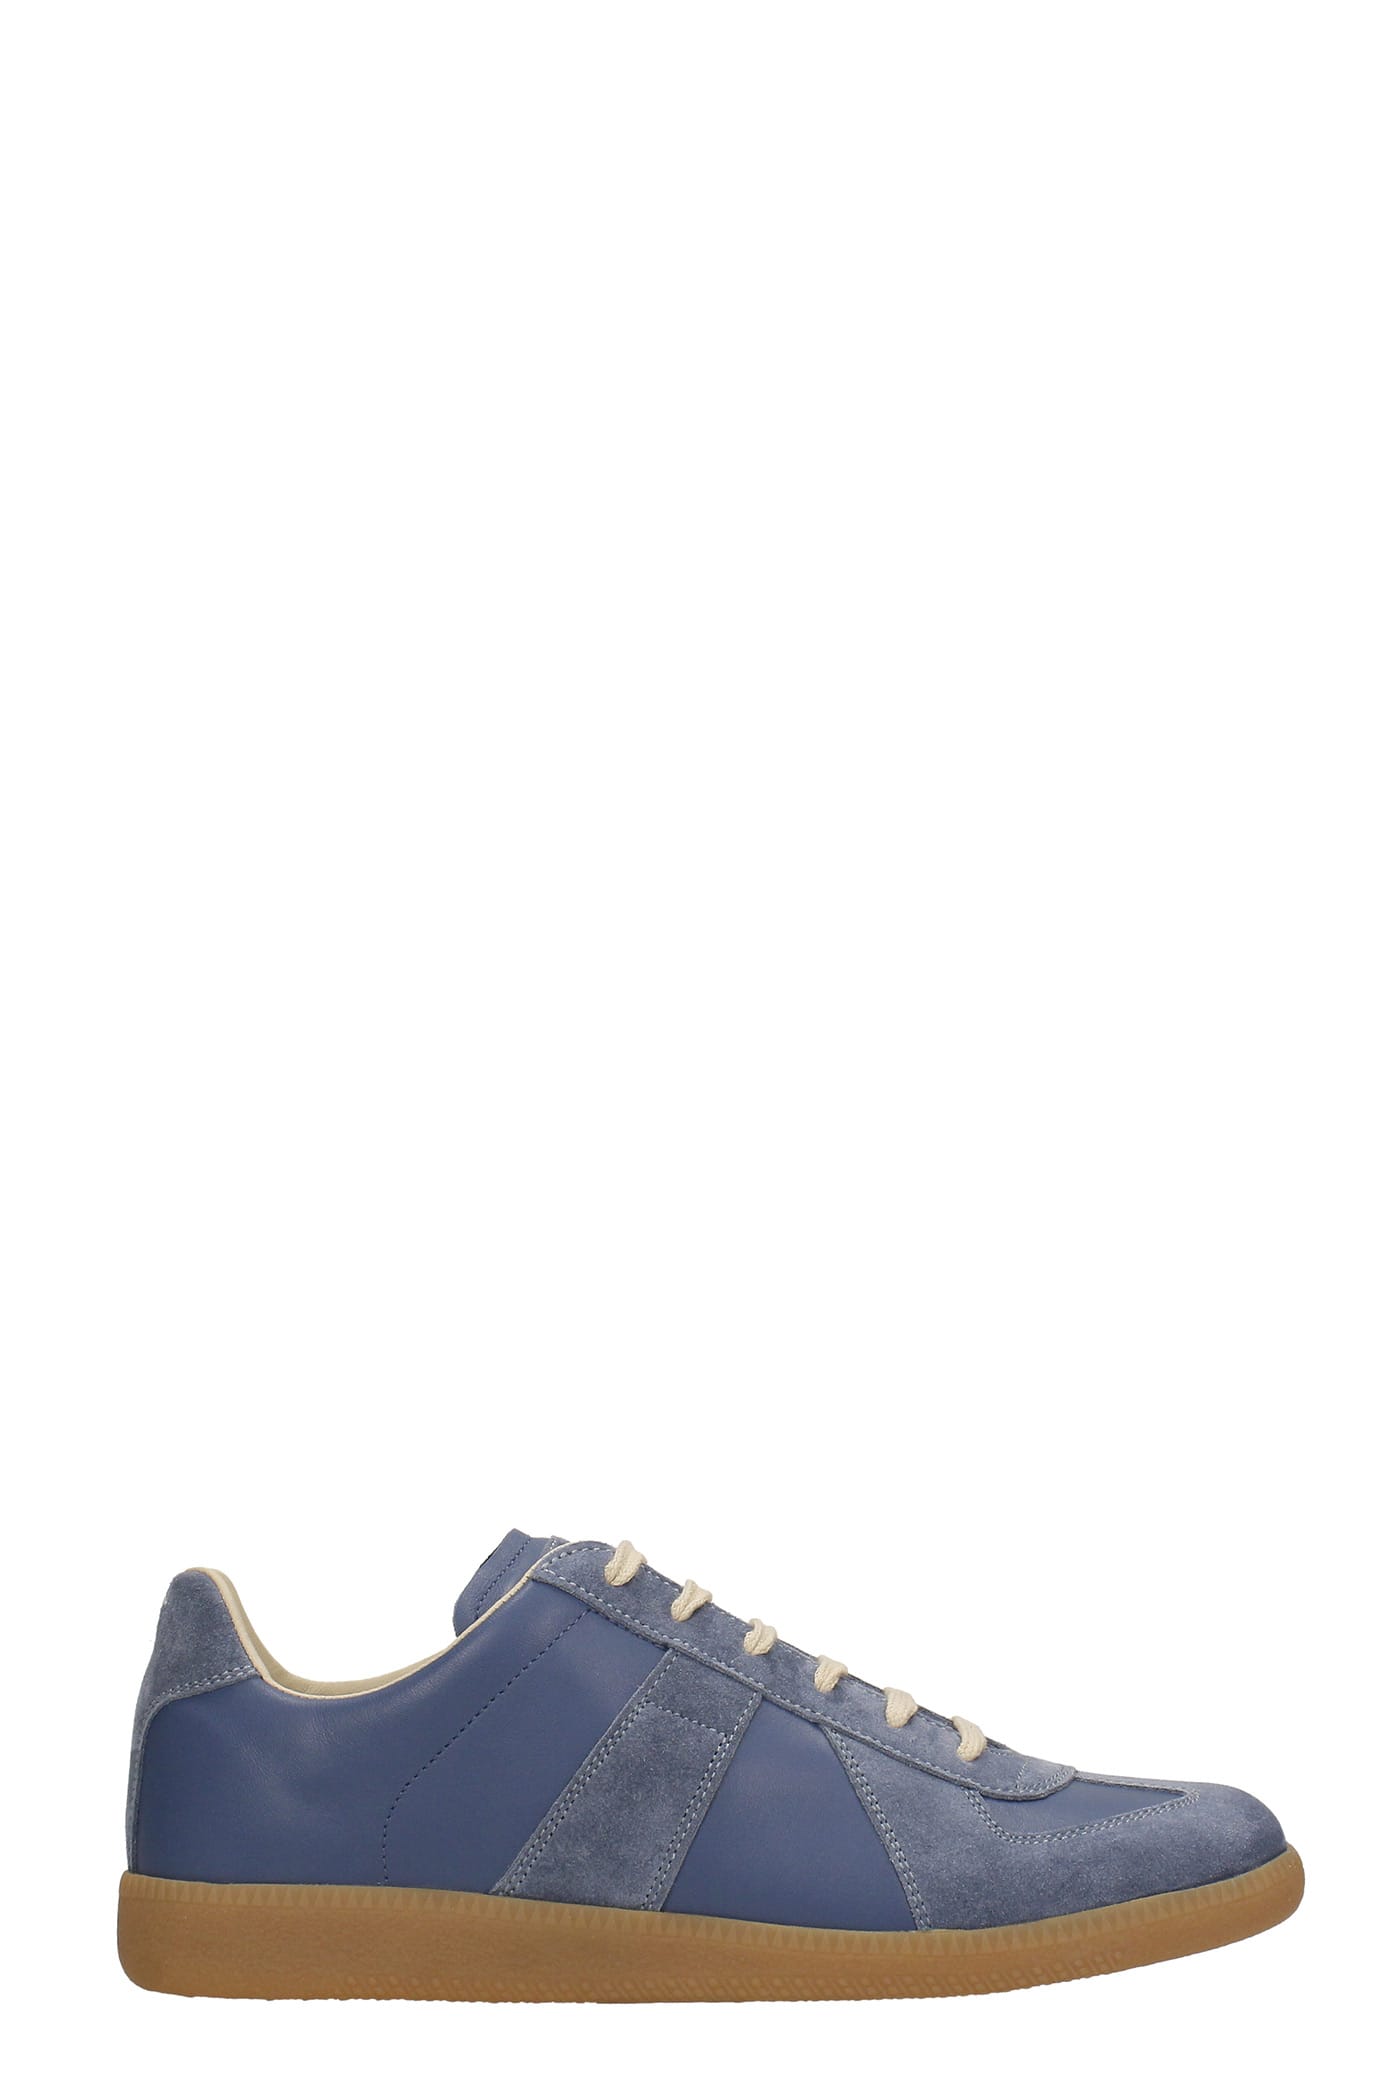 Maison Margiela Replica Sneakers In Blue Suede And Leather In Blue 1